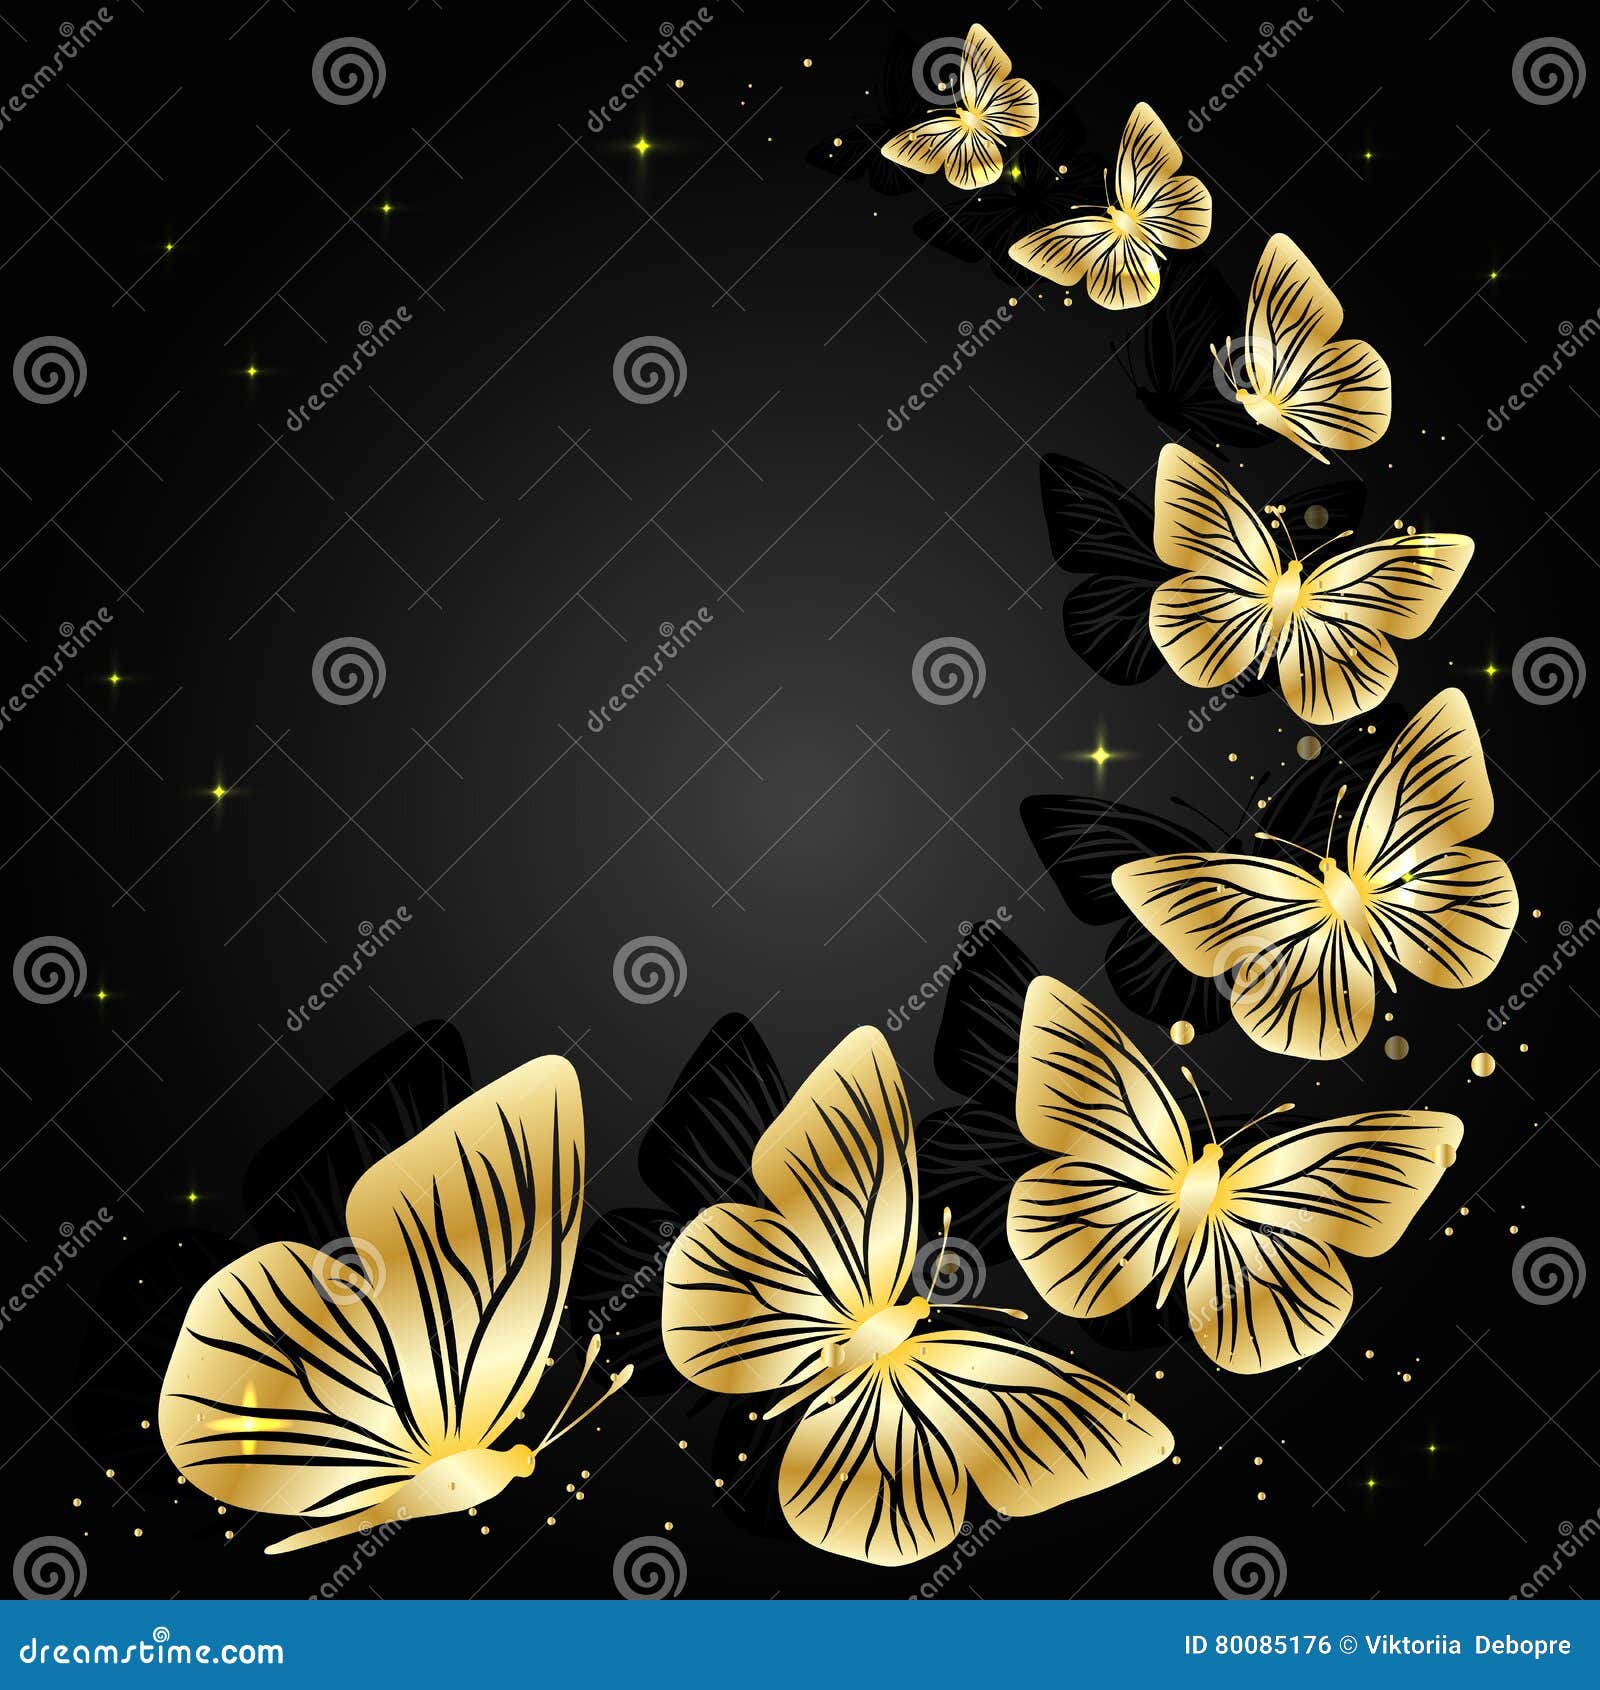 Gold Butterflies on Dark Background Stock Vector - Illustration of card,  circle: 80085176